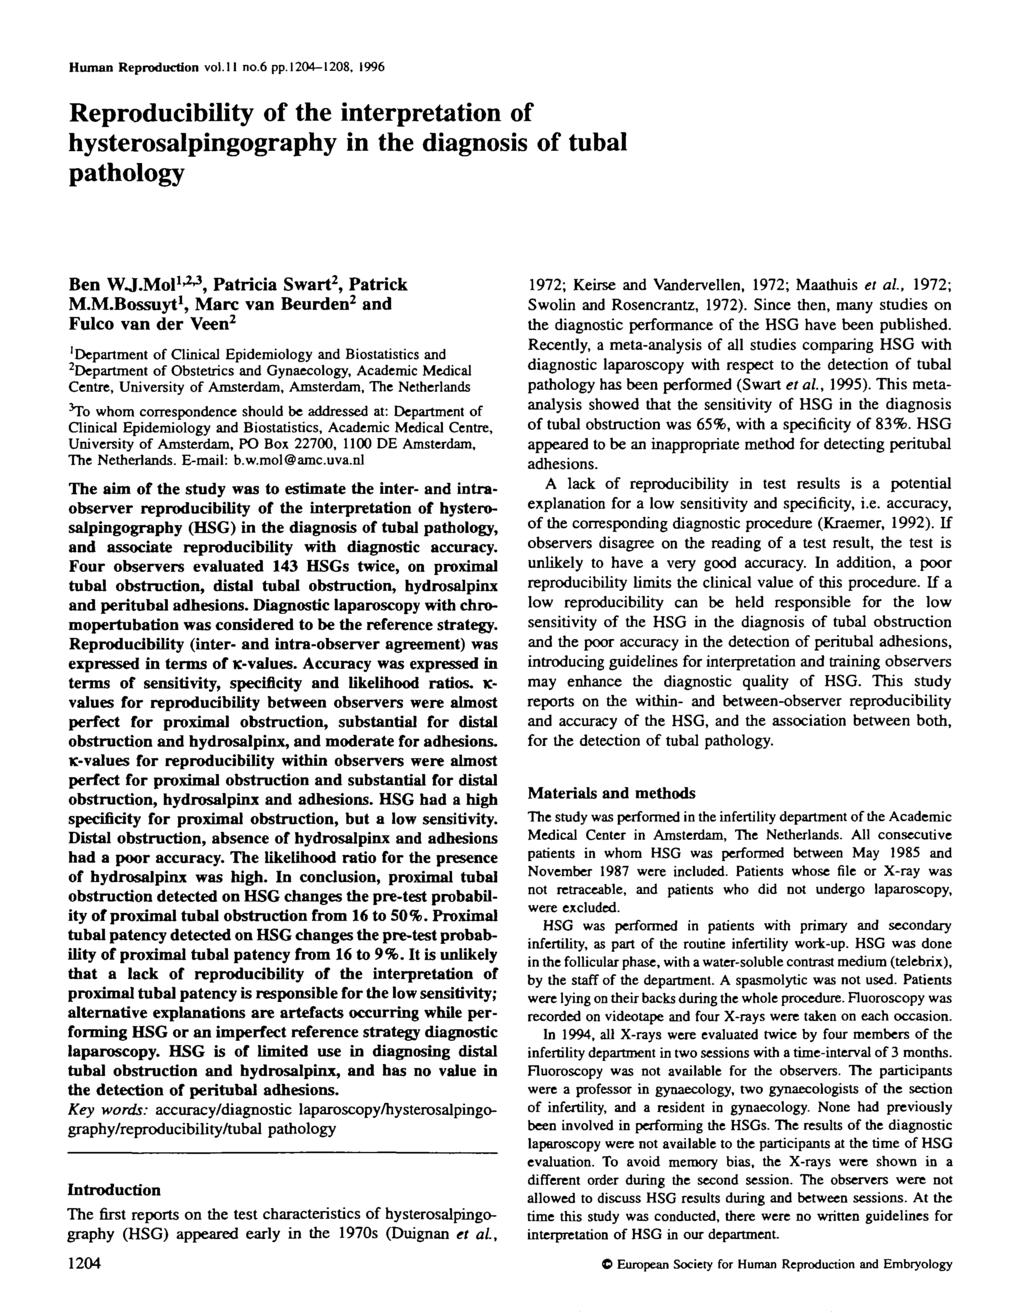 Human Reproduction vol.11 no.6 pp. 124-128, 1996 Reproducibility of the interpretation of hysterosalpingography in the diagnosis of tubal pathology Ben WJ.